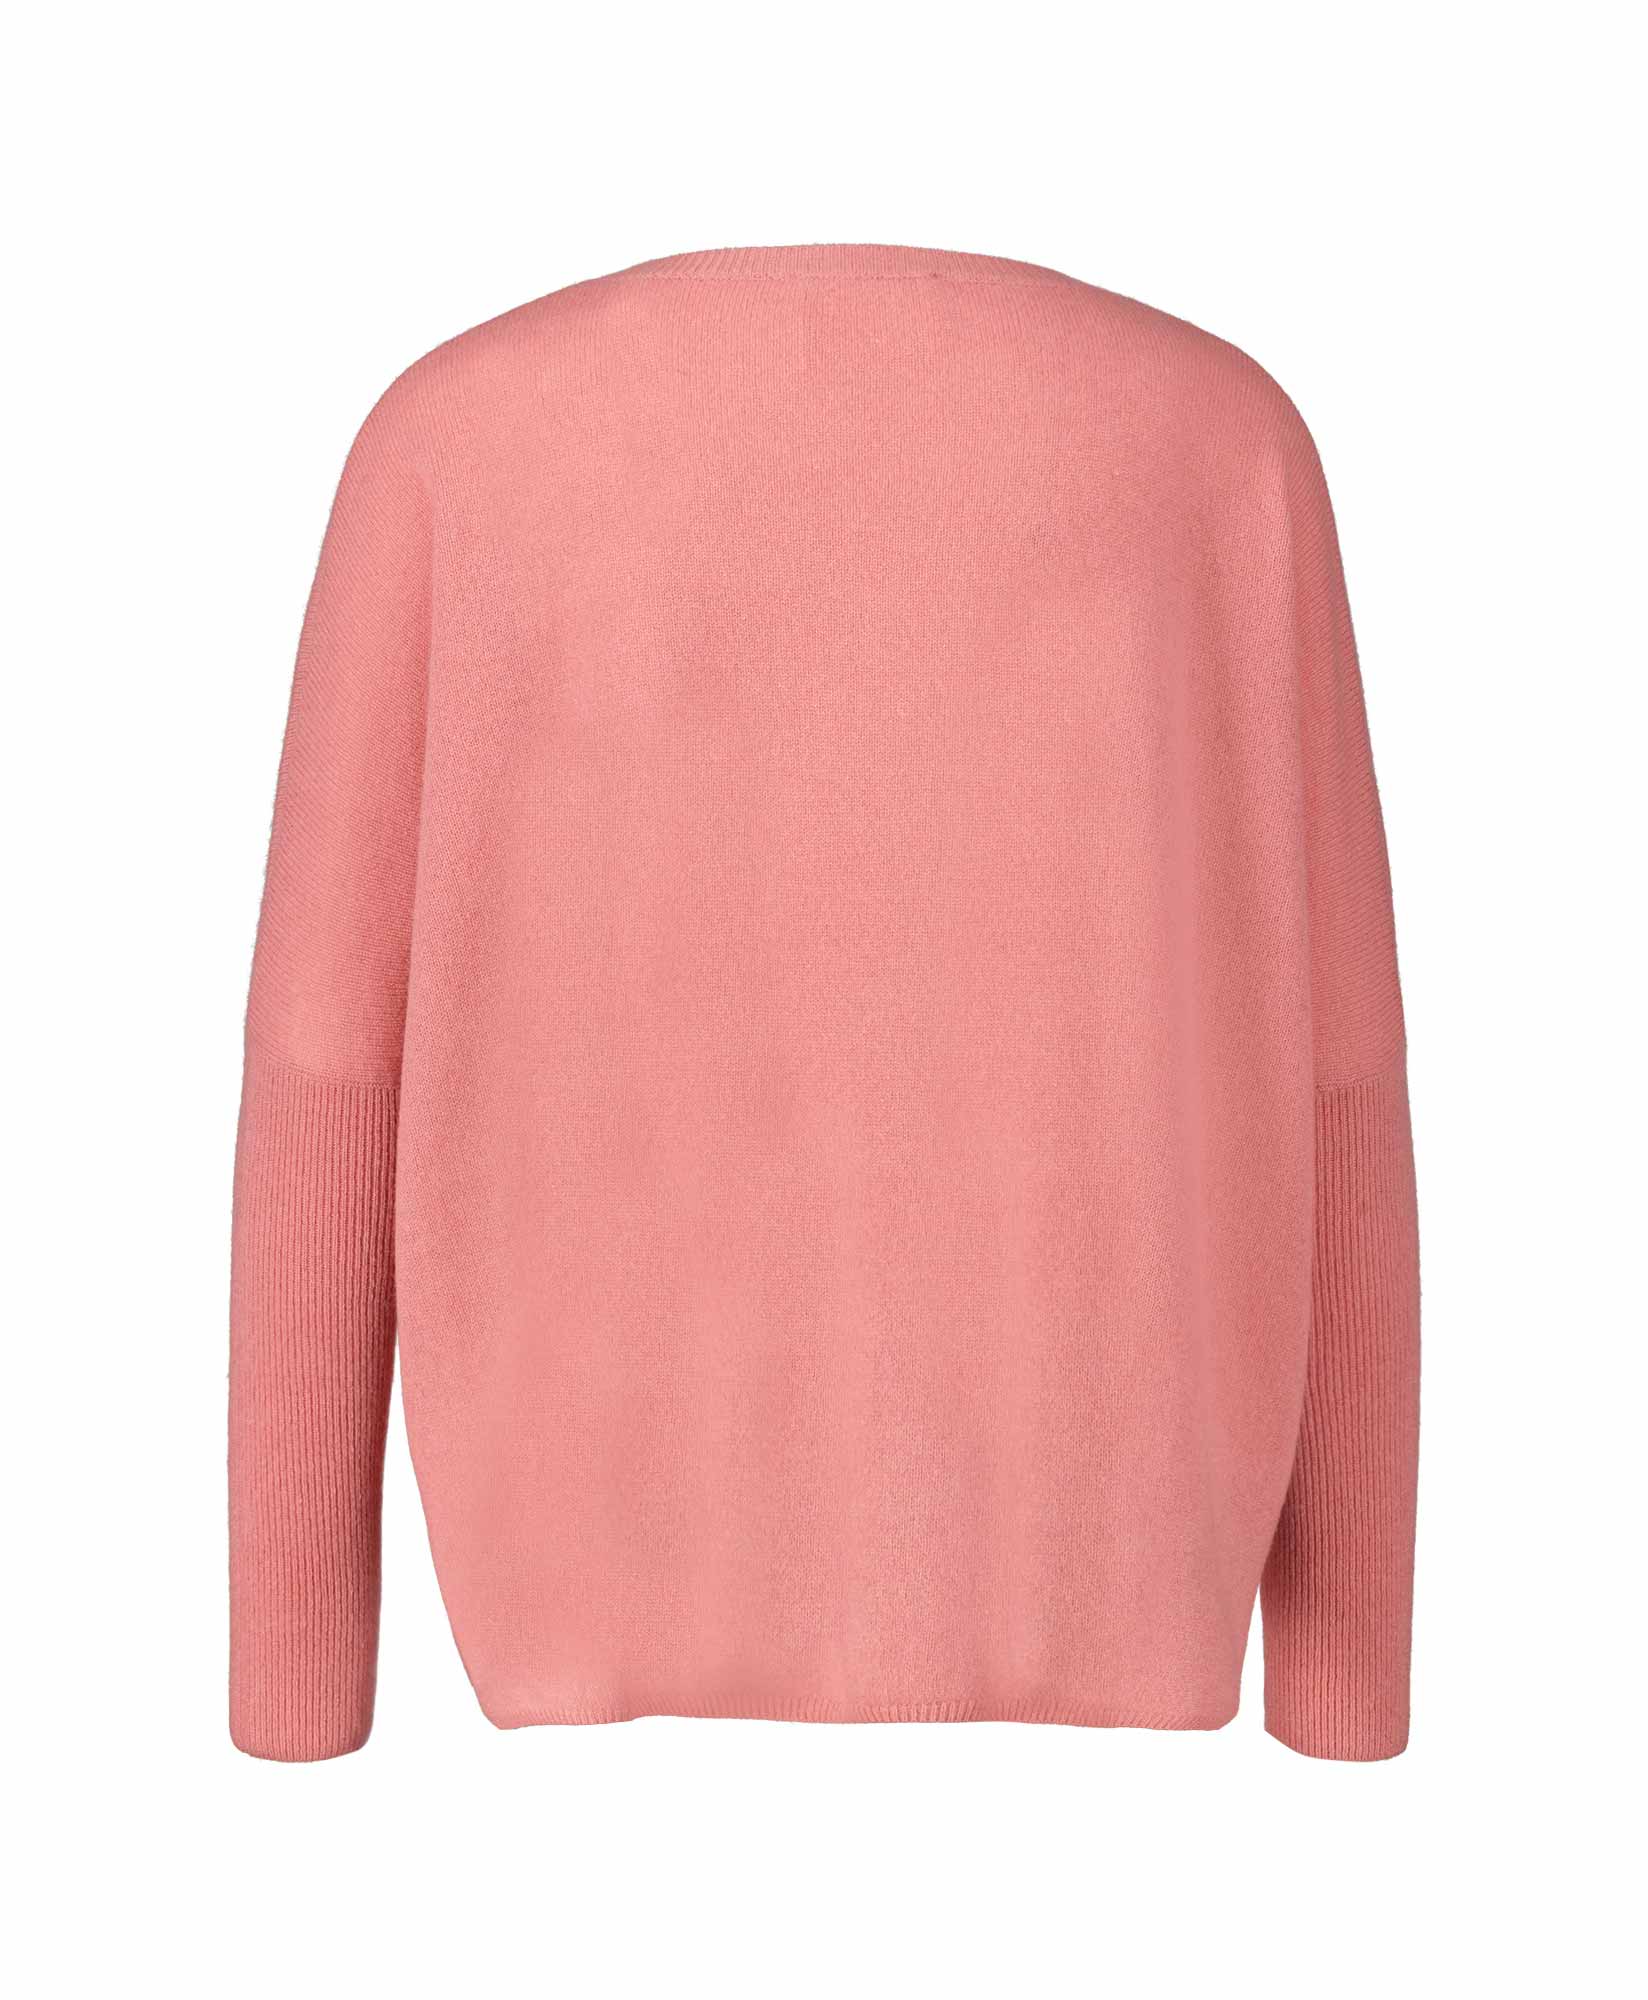 Absolut Cashmere Pullover Ac142012c Camille Rose